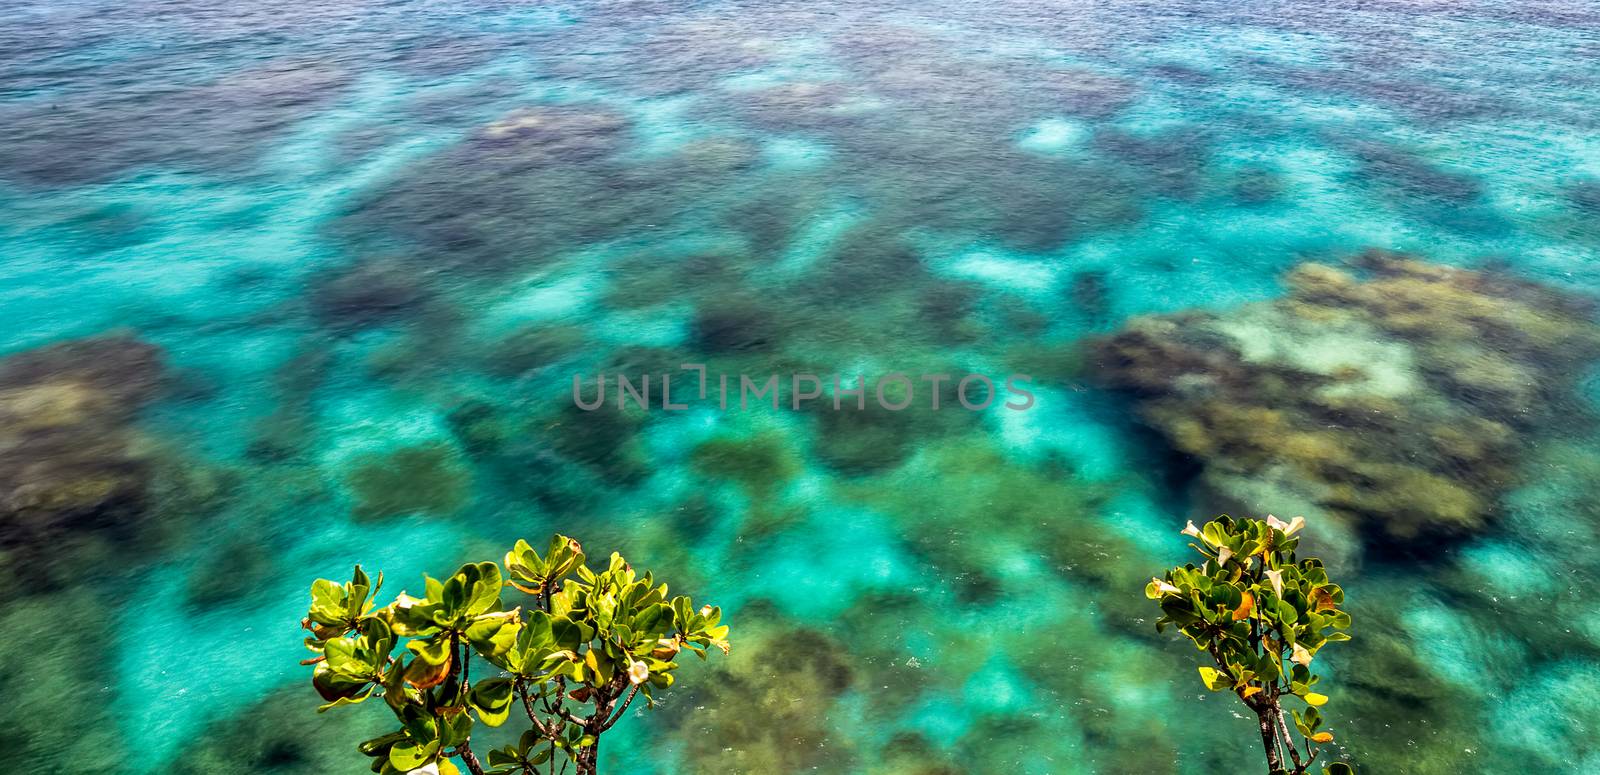 Crystal clear ocean water with coral reefs by DamantisZ